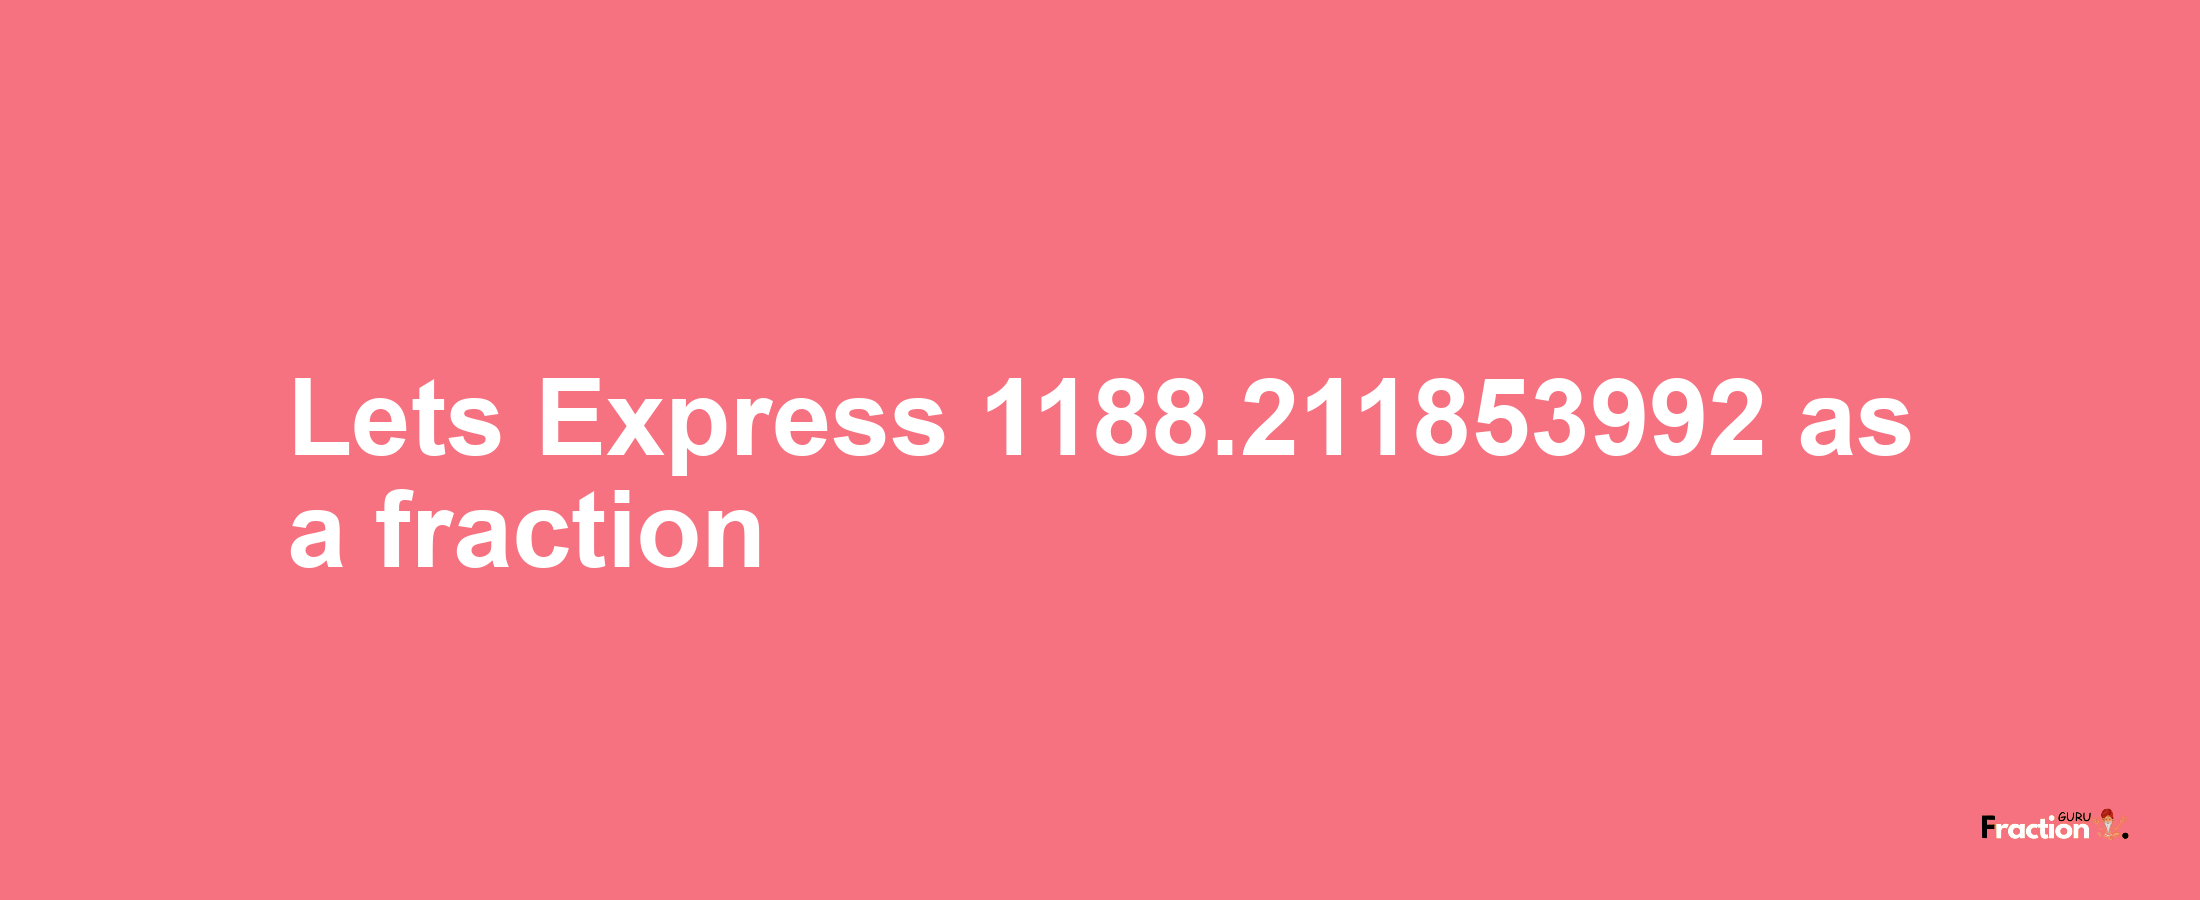 Lets Express 1188.211853992 as afraction